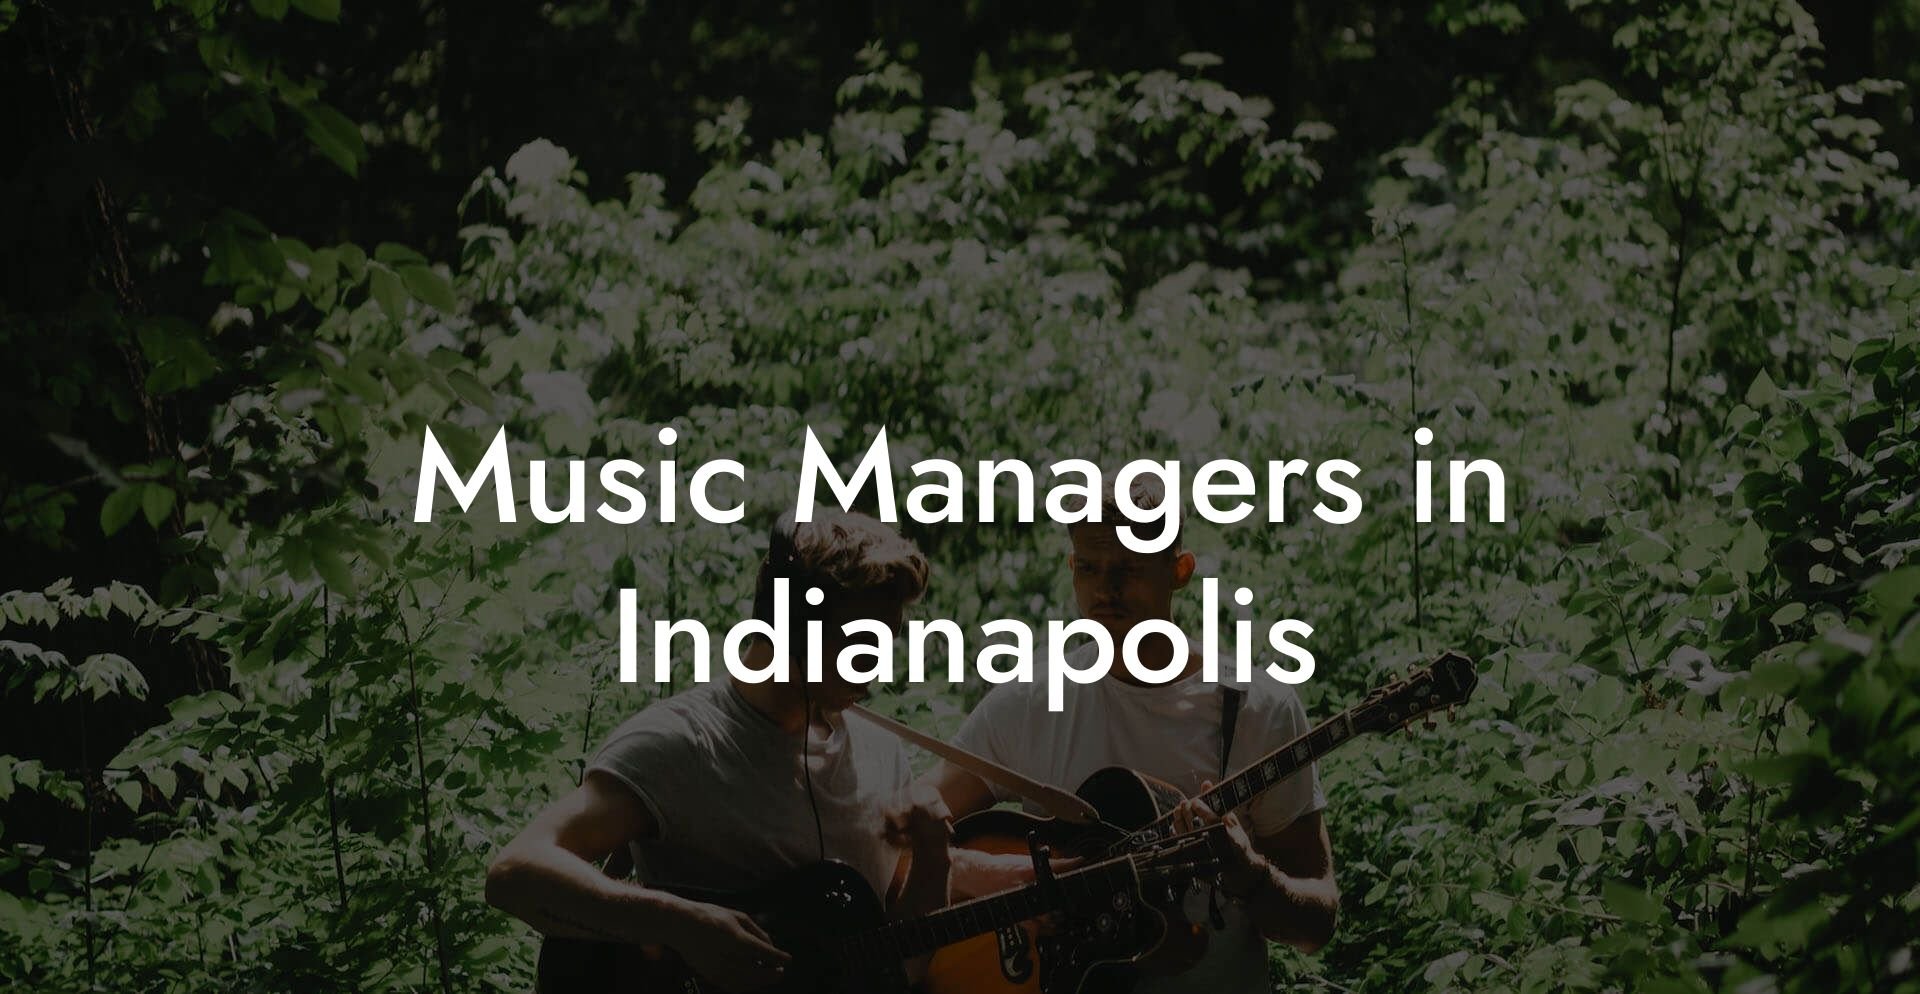 Music Managers in Indianapolis